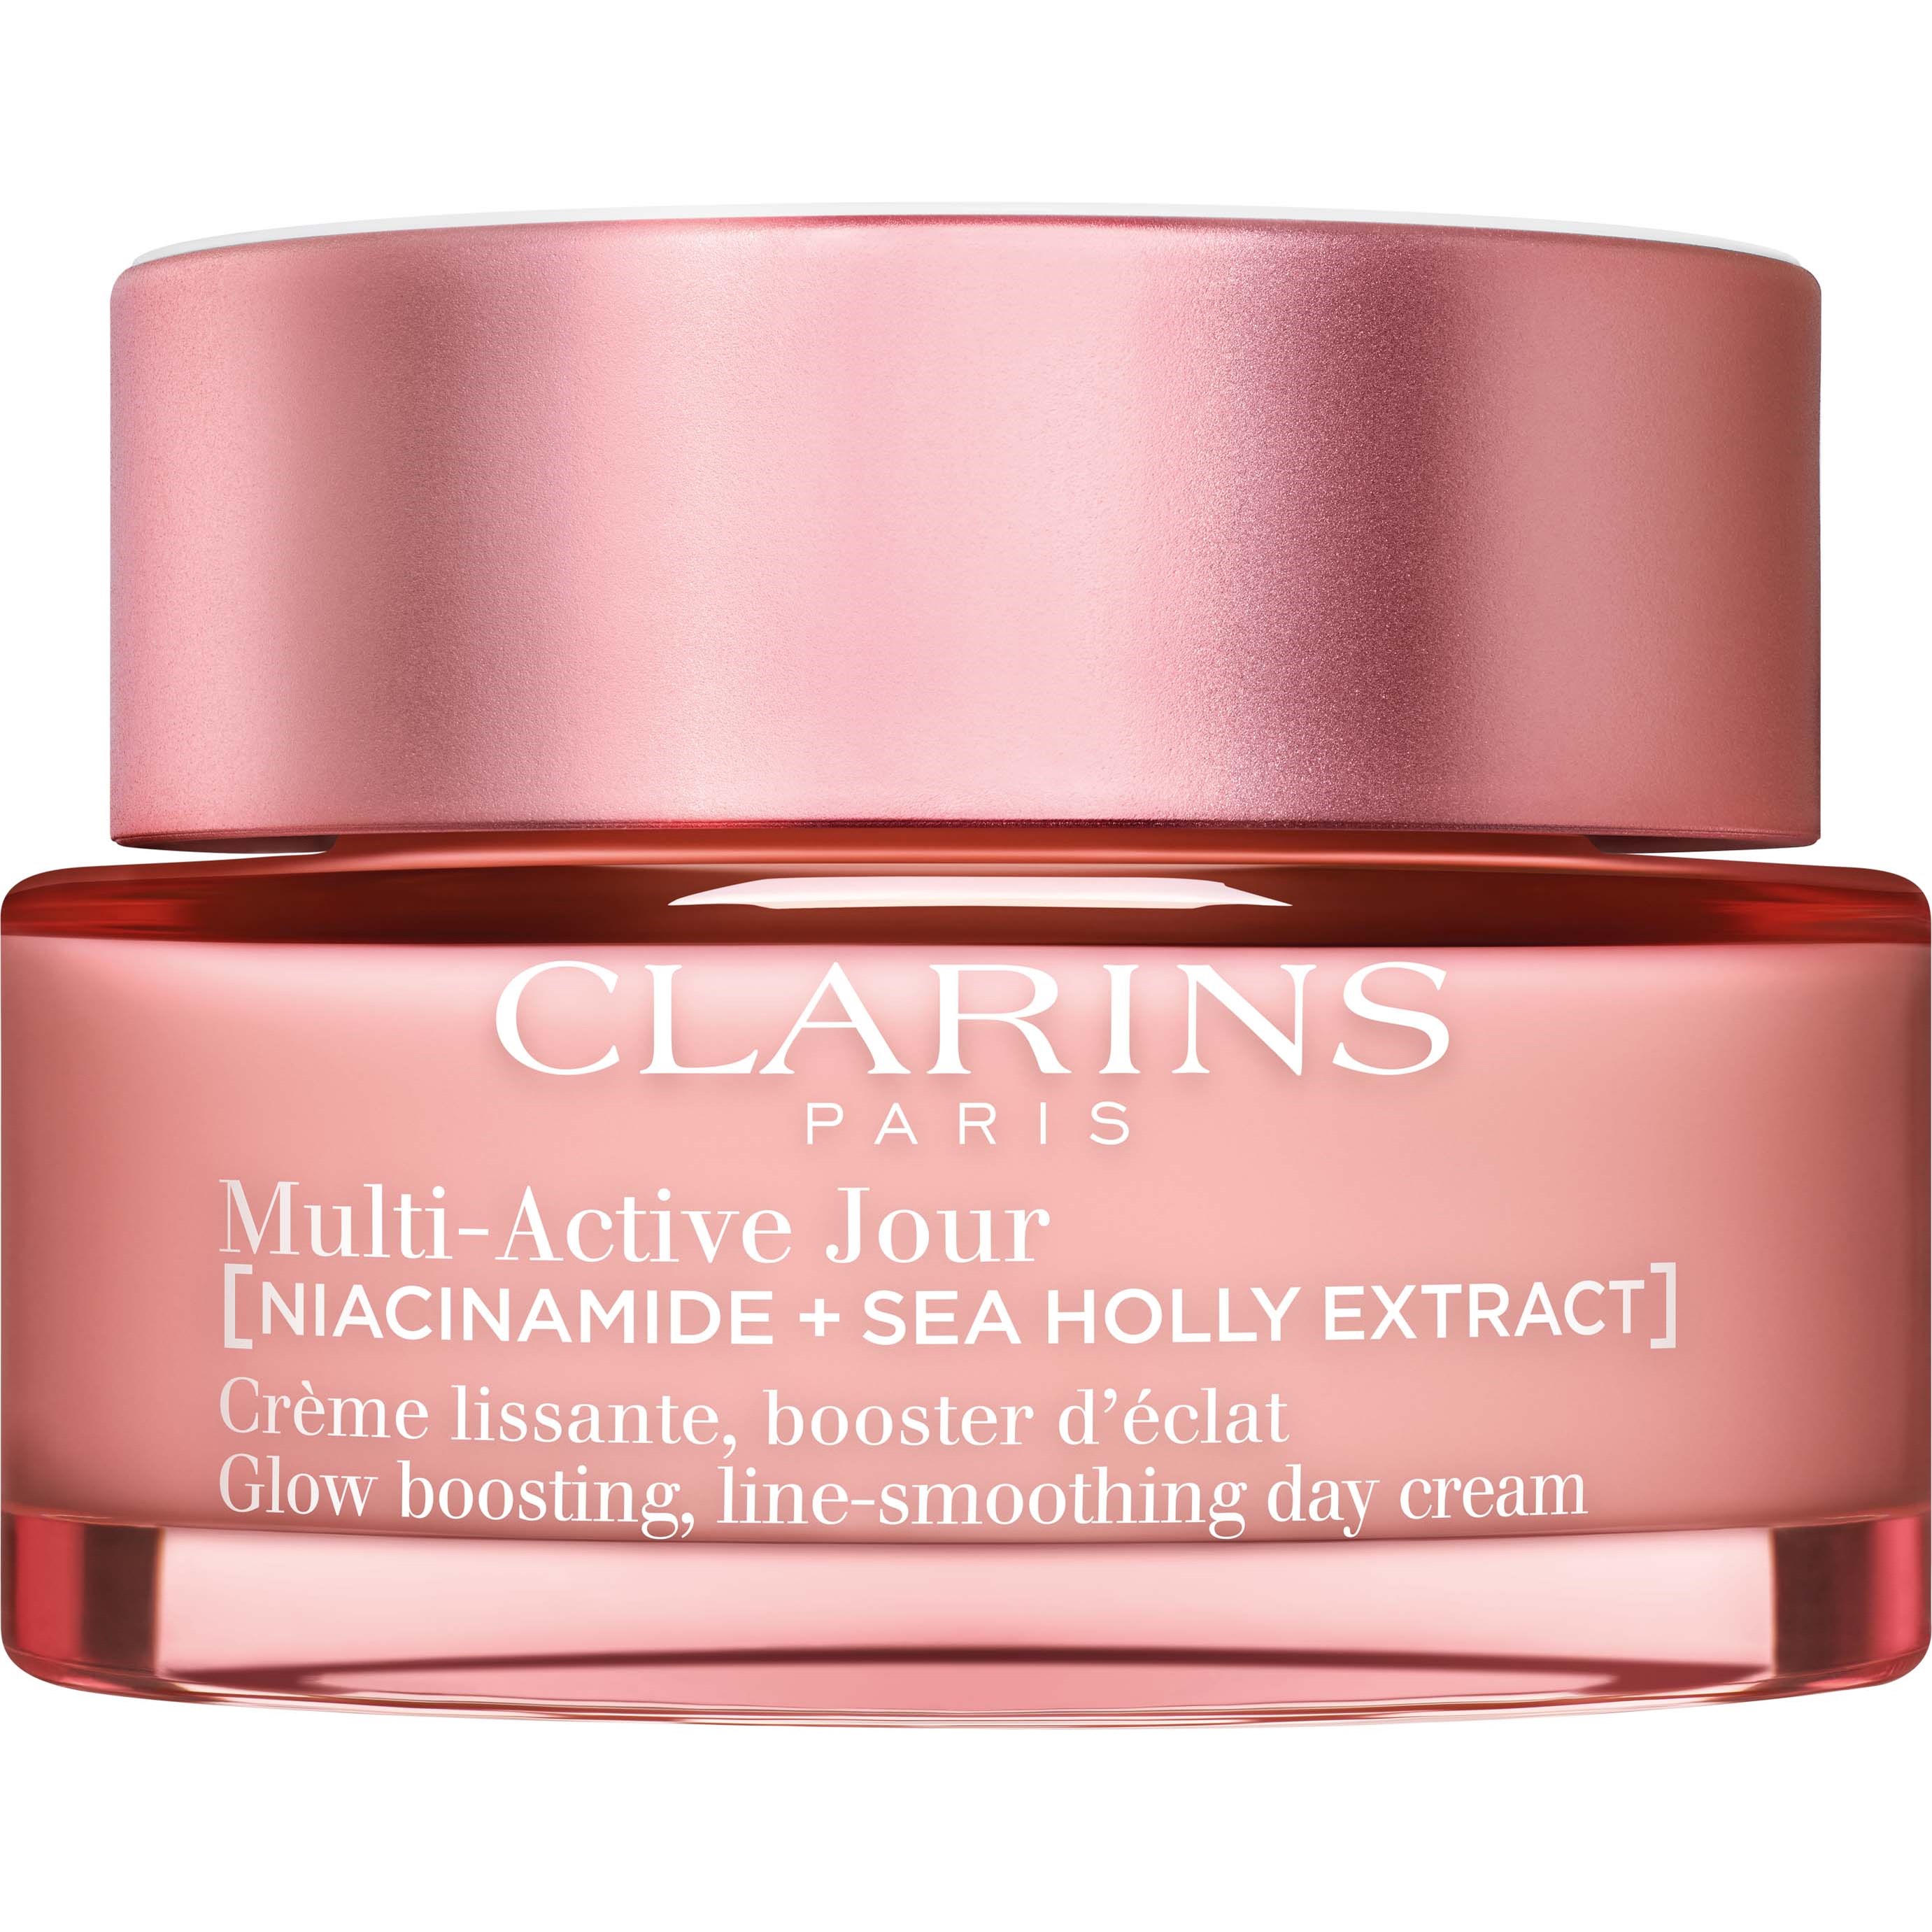 Clarins Multi-Active Glow Boosting, Line-smoothing Day Cream Dry